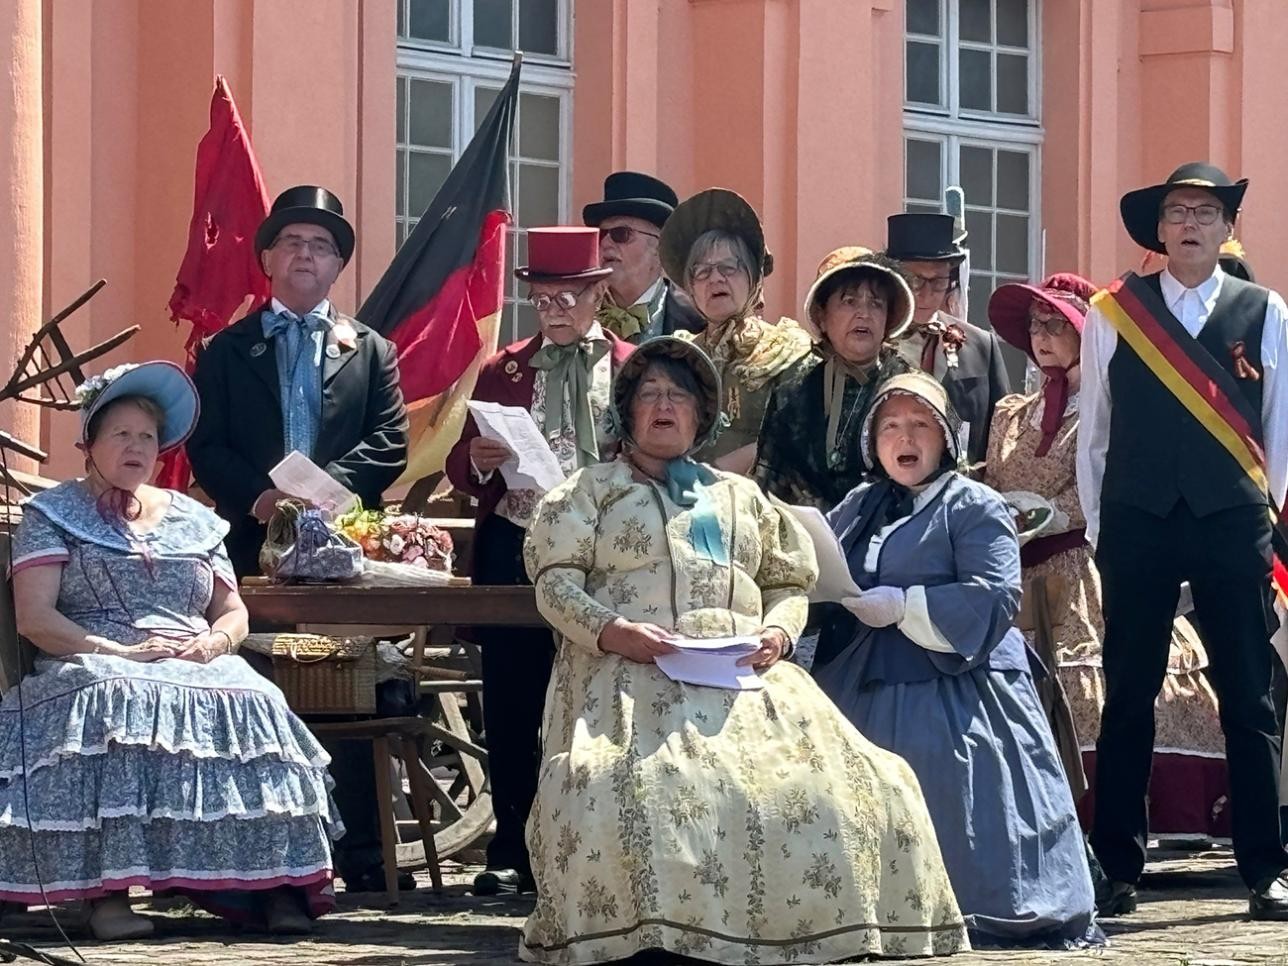 Actors sing in front of the castle during the play "Time travel to the Baden Revolution of 1849"